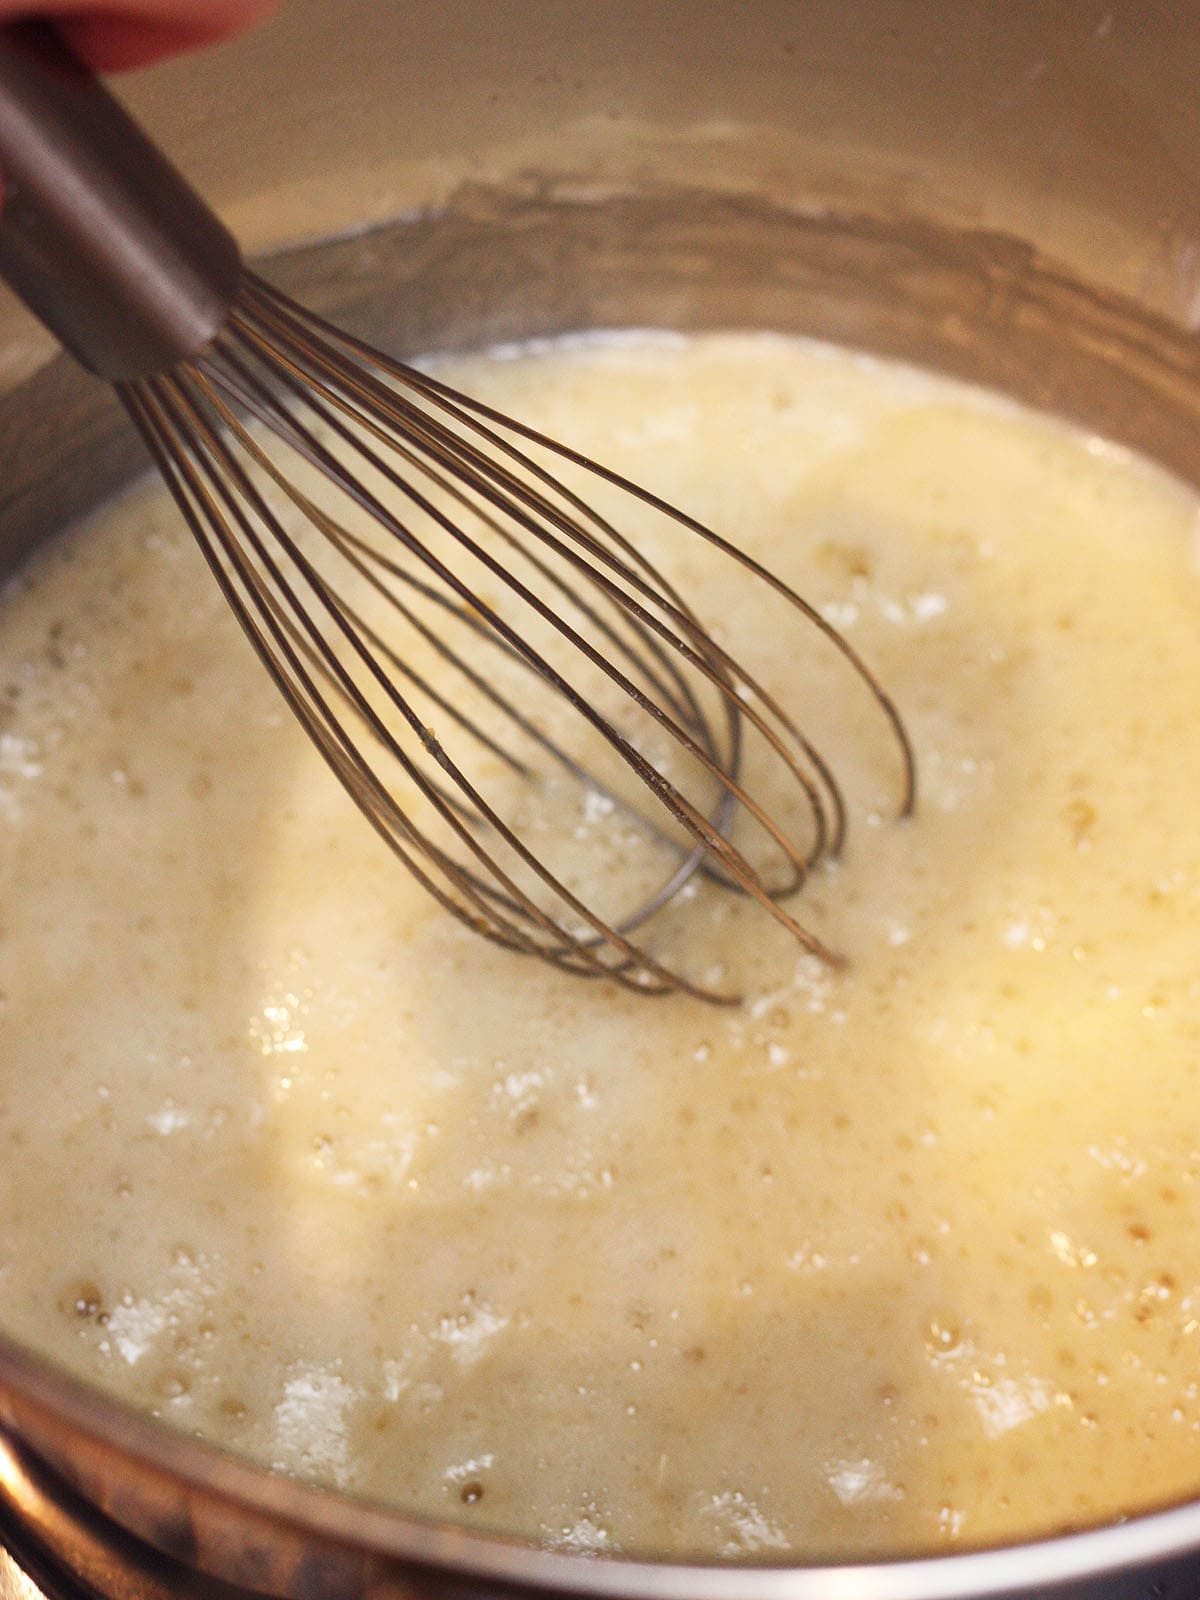 Metal whisk mixing in flour into the oil.